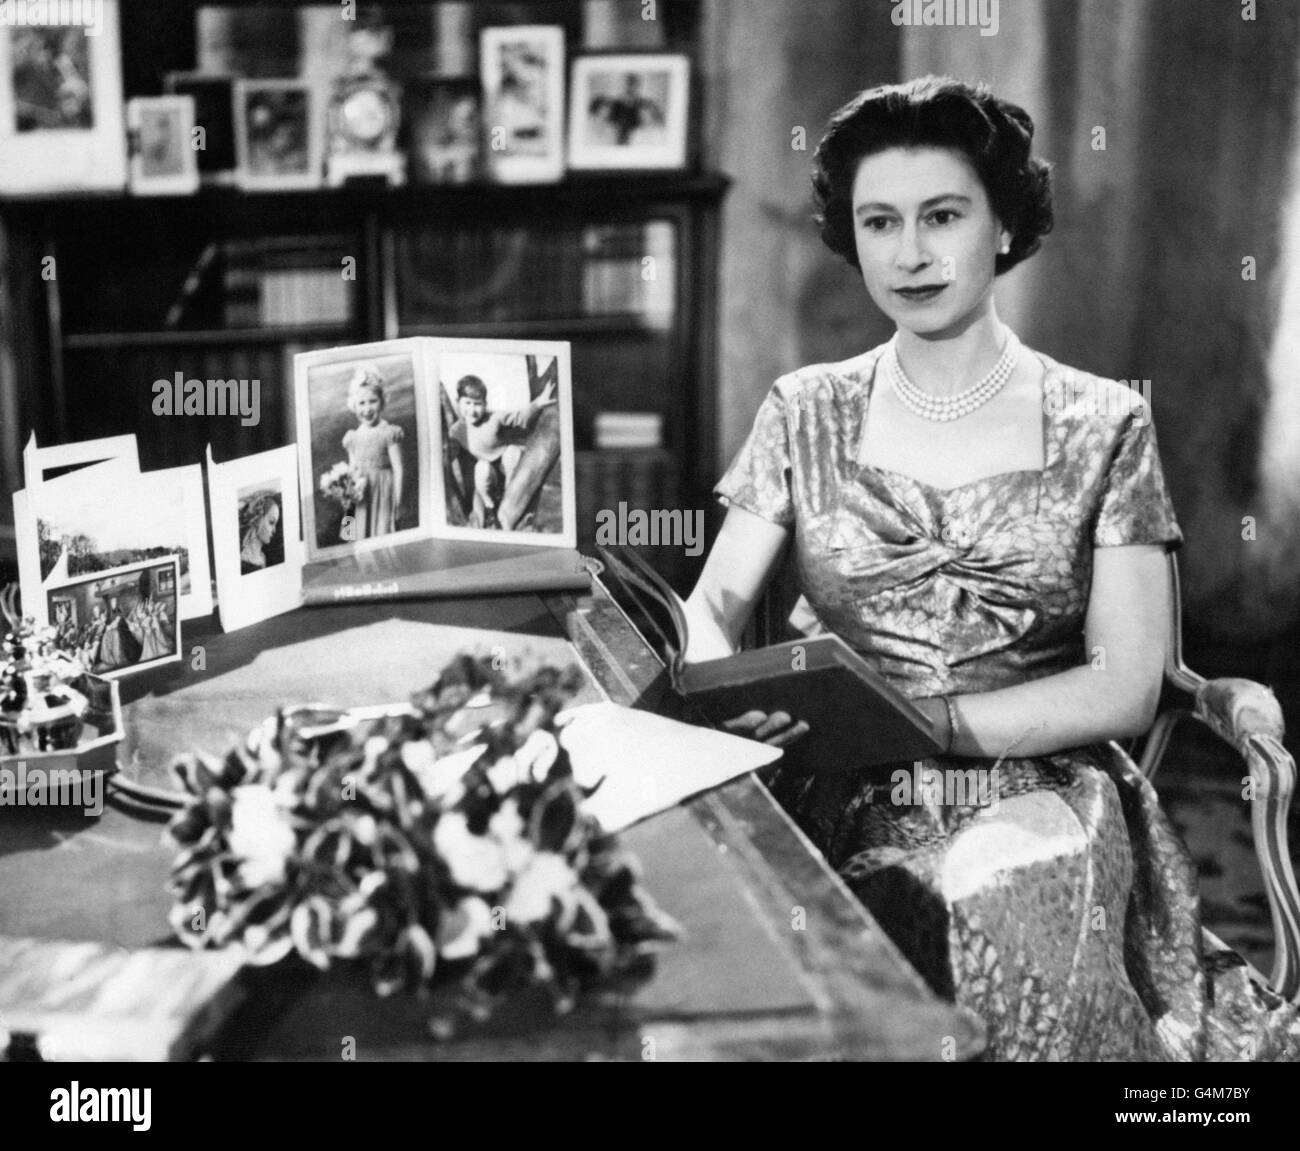 The Queen, in a gold lame dress, is seen in the Long Library at Sandringham shortly after making the traditional Christmas Day broadcast to the nation. On the desk are portraits of Prince Charles and Princess Anne. The Queen is holding the copy of 'Pilgrim's Progress', from which she read a few lines during her message. The broadcast was televised this year for the first time and was carried by both the BBC and ITV. It was the 25th anniversary of the first radio message to the Commonwealth by her grandfather, King George V. Stock Photo